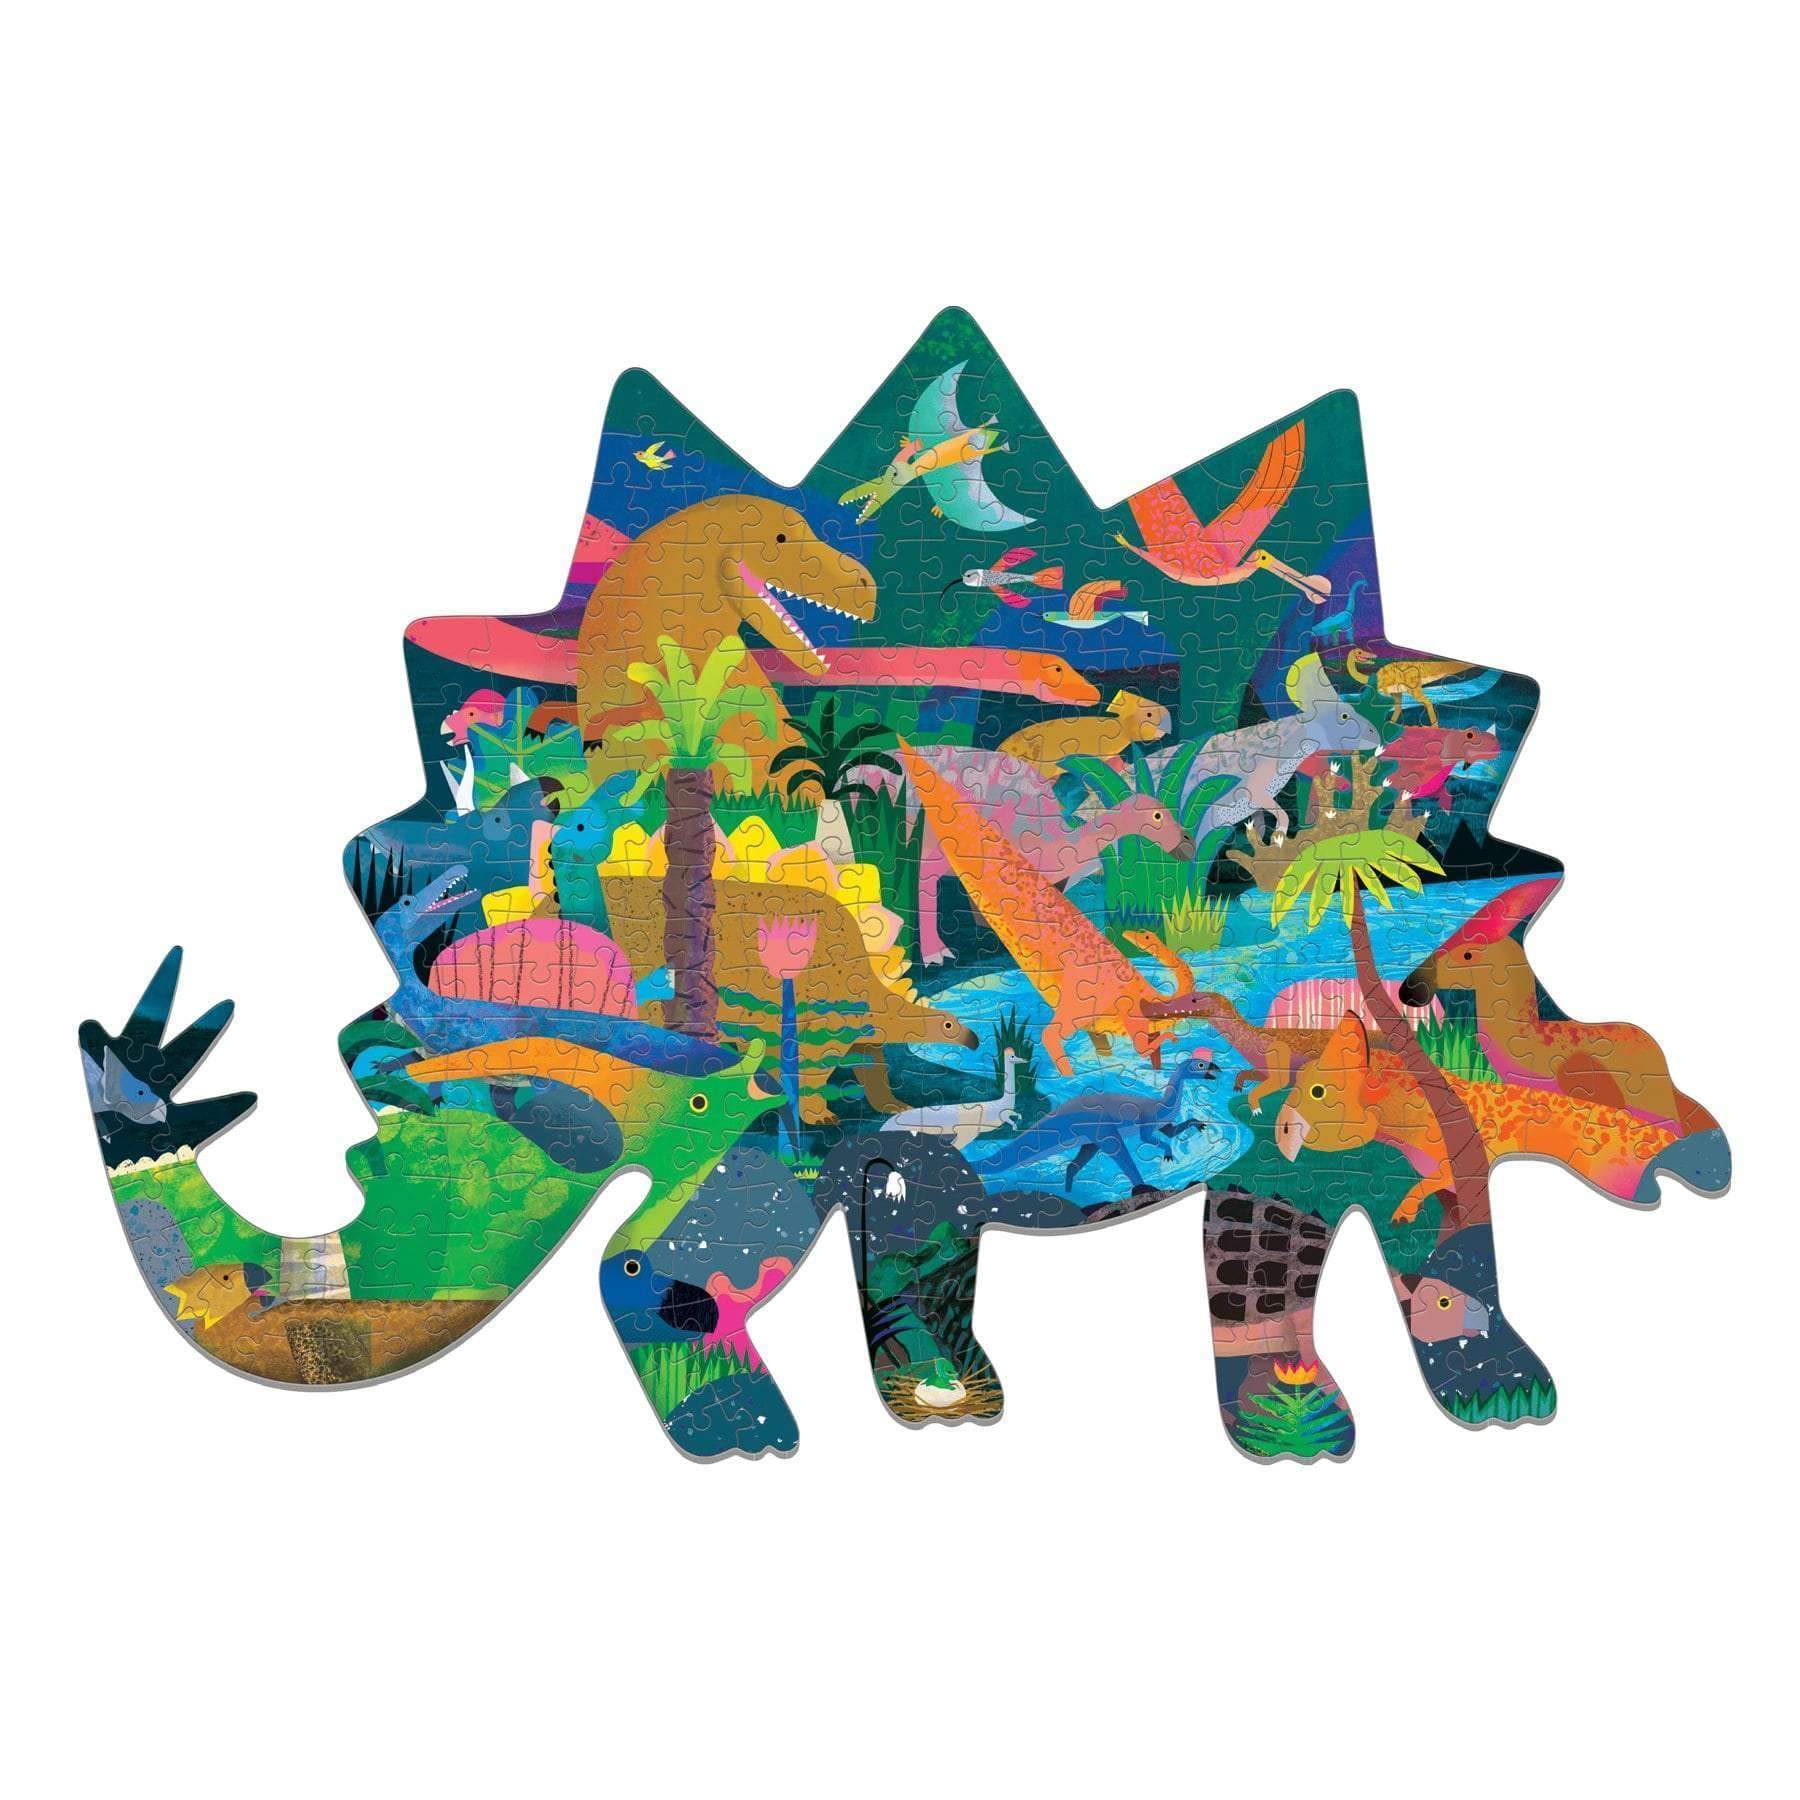 Mud Puppy | 300pc Shaped Puzzle - Dinosaurs